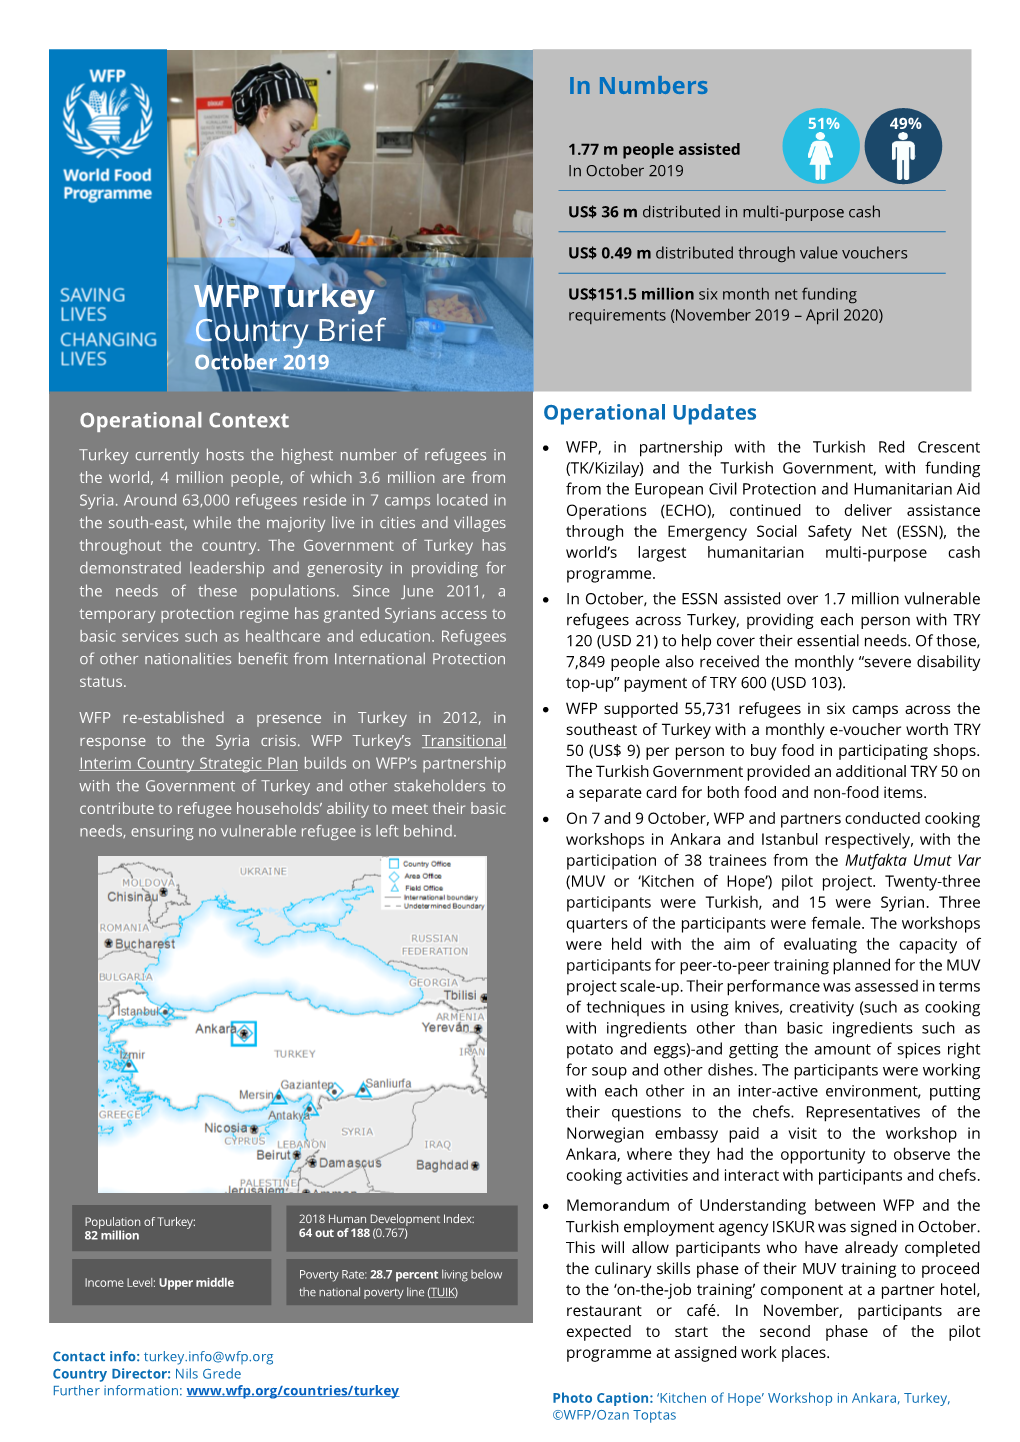 WFP Turkey Country Brief USAID October 2019